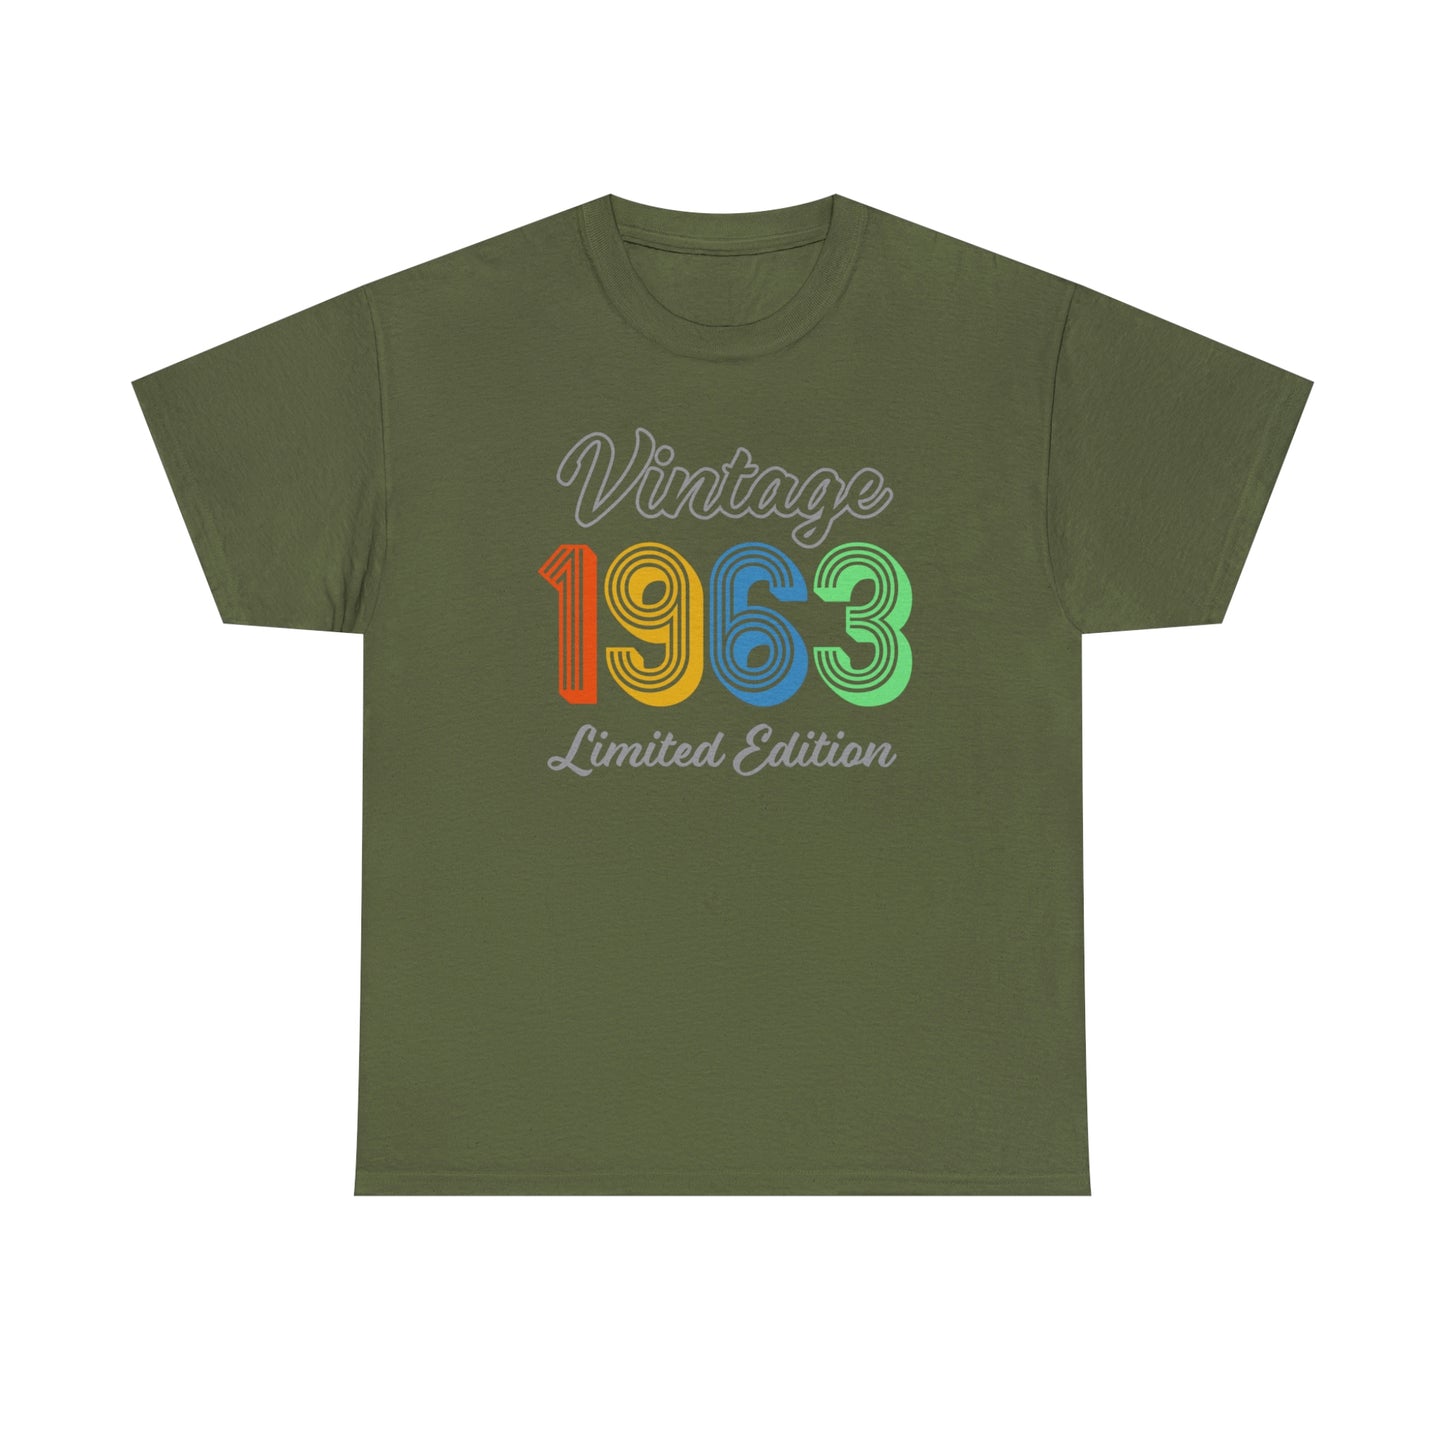 Vintage 1963 T-Shirt For Limited Edition TShirt For Class Reunion T Shirt For Birthday Shirt For Birthday Gift For Graduation TShirt